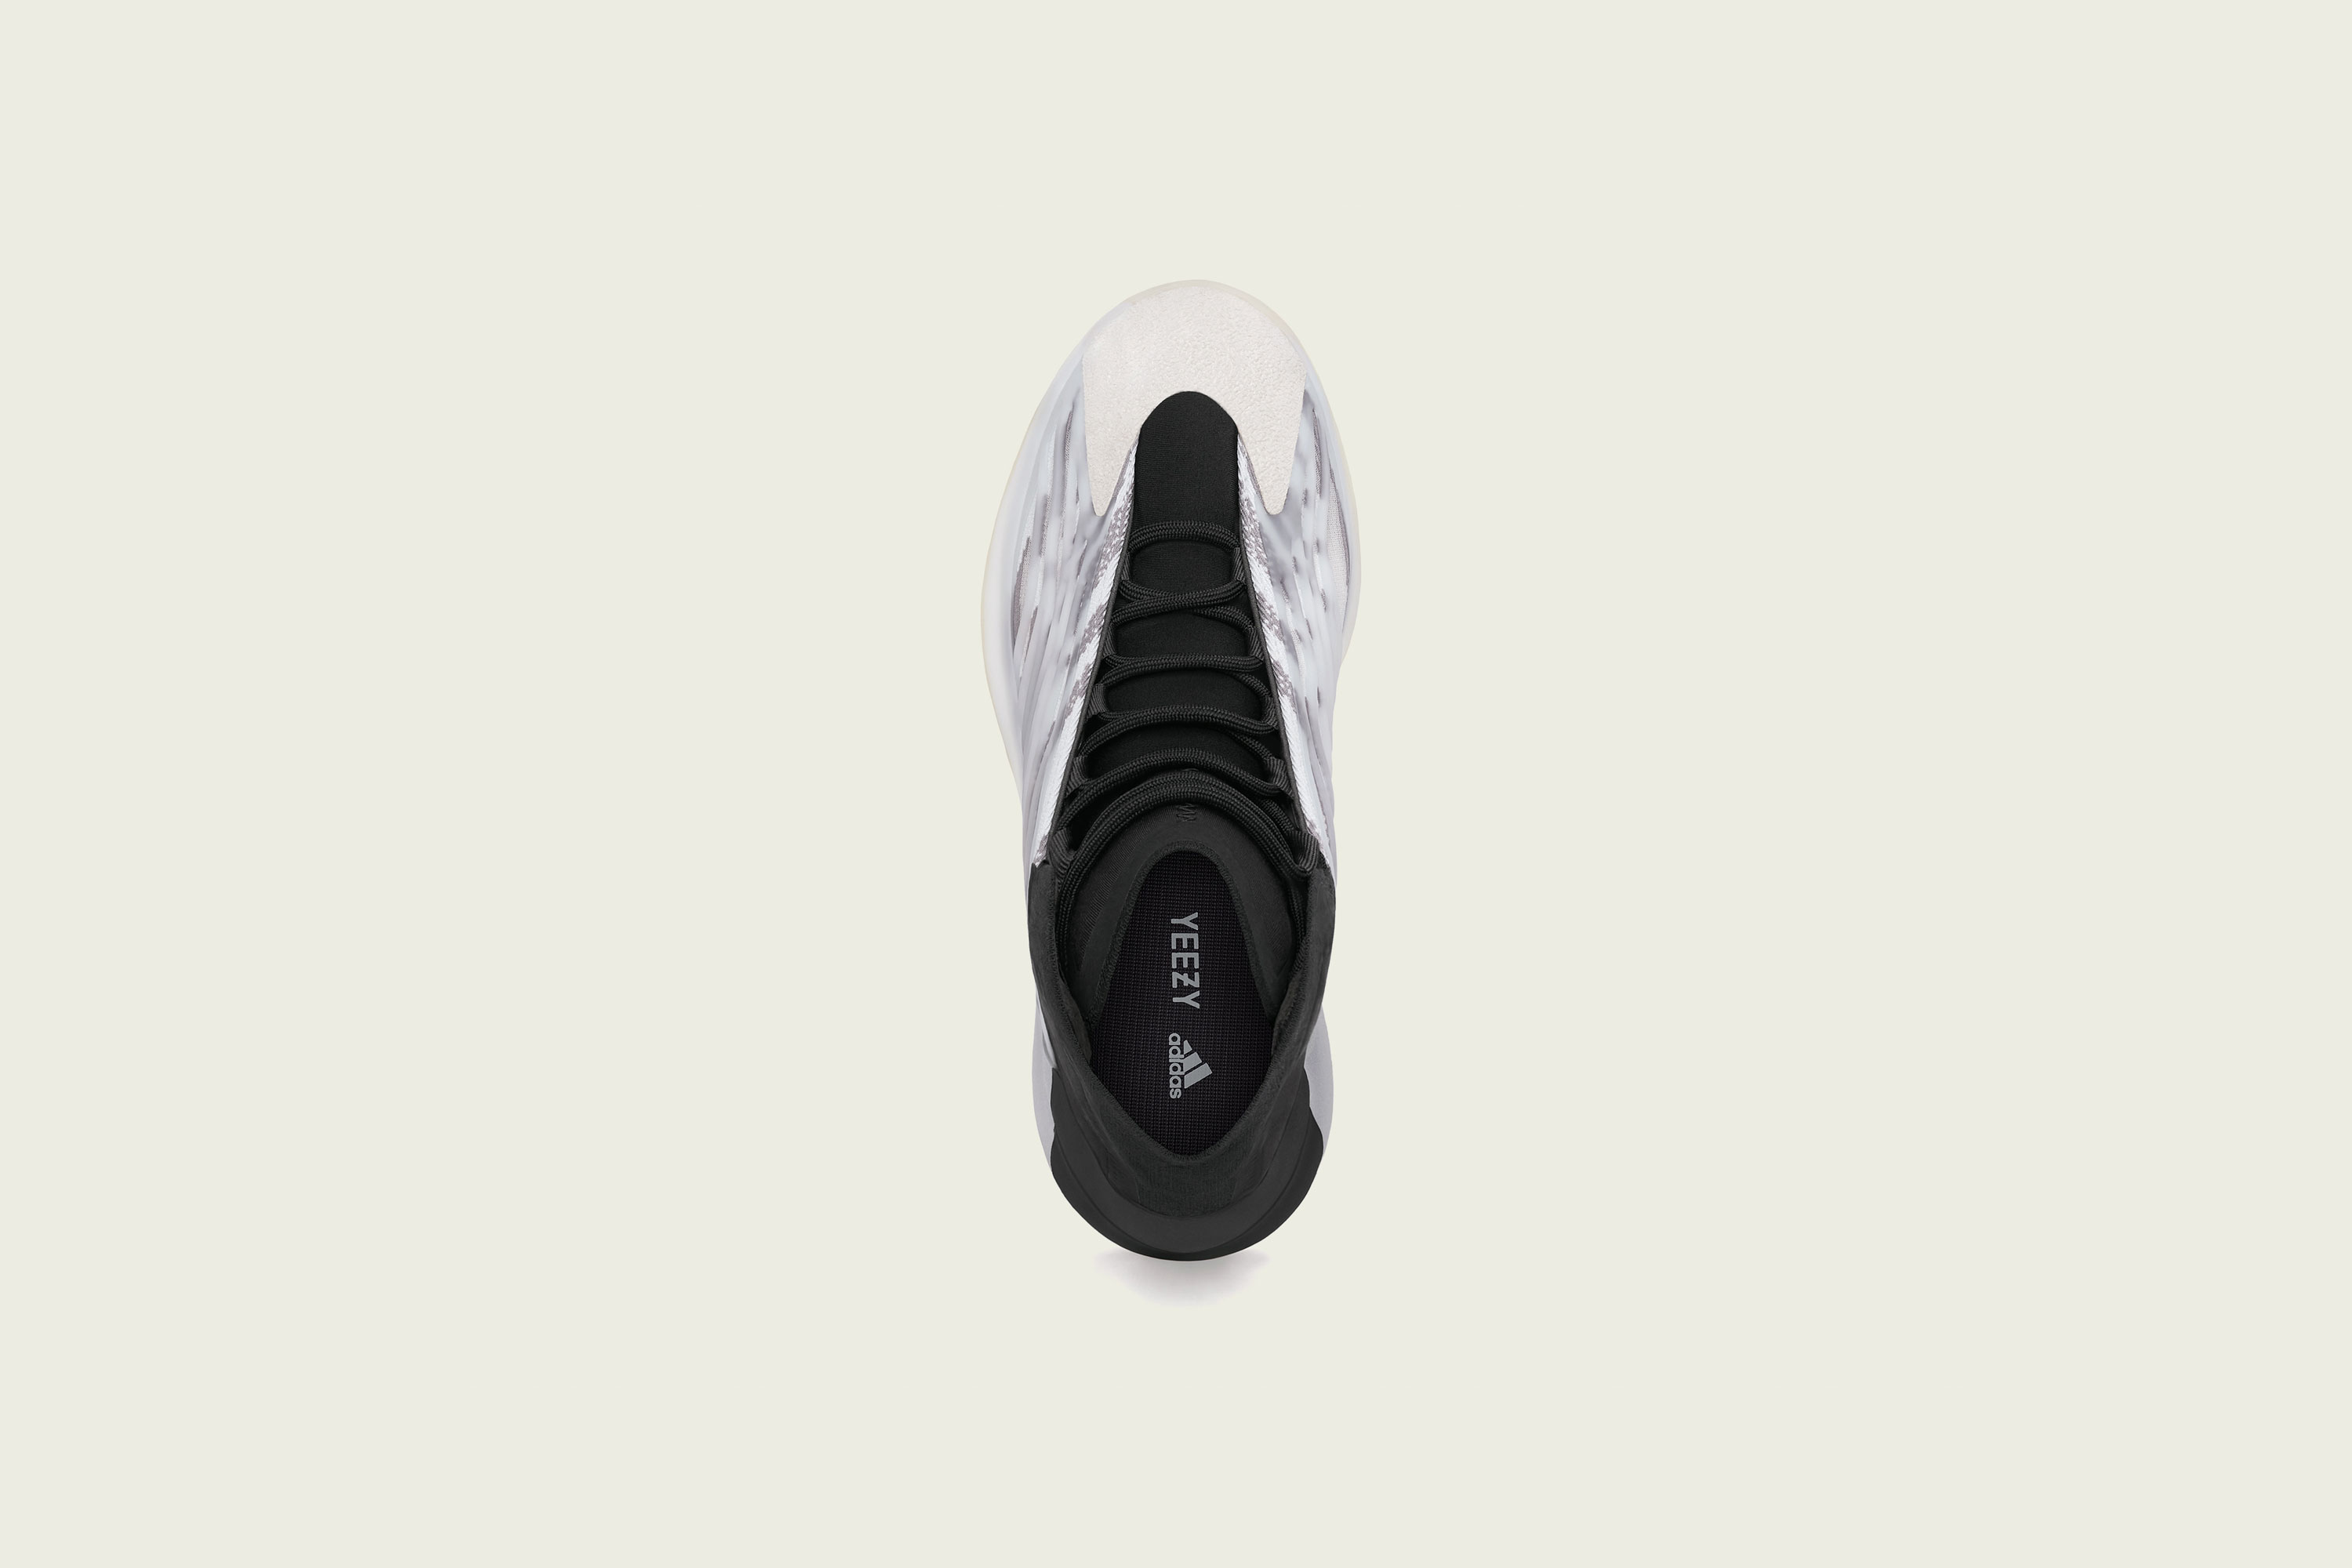 Up There Store - adidas Originals Yeezy Boost QNTM BSKTBL